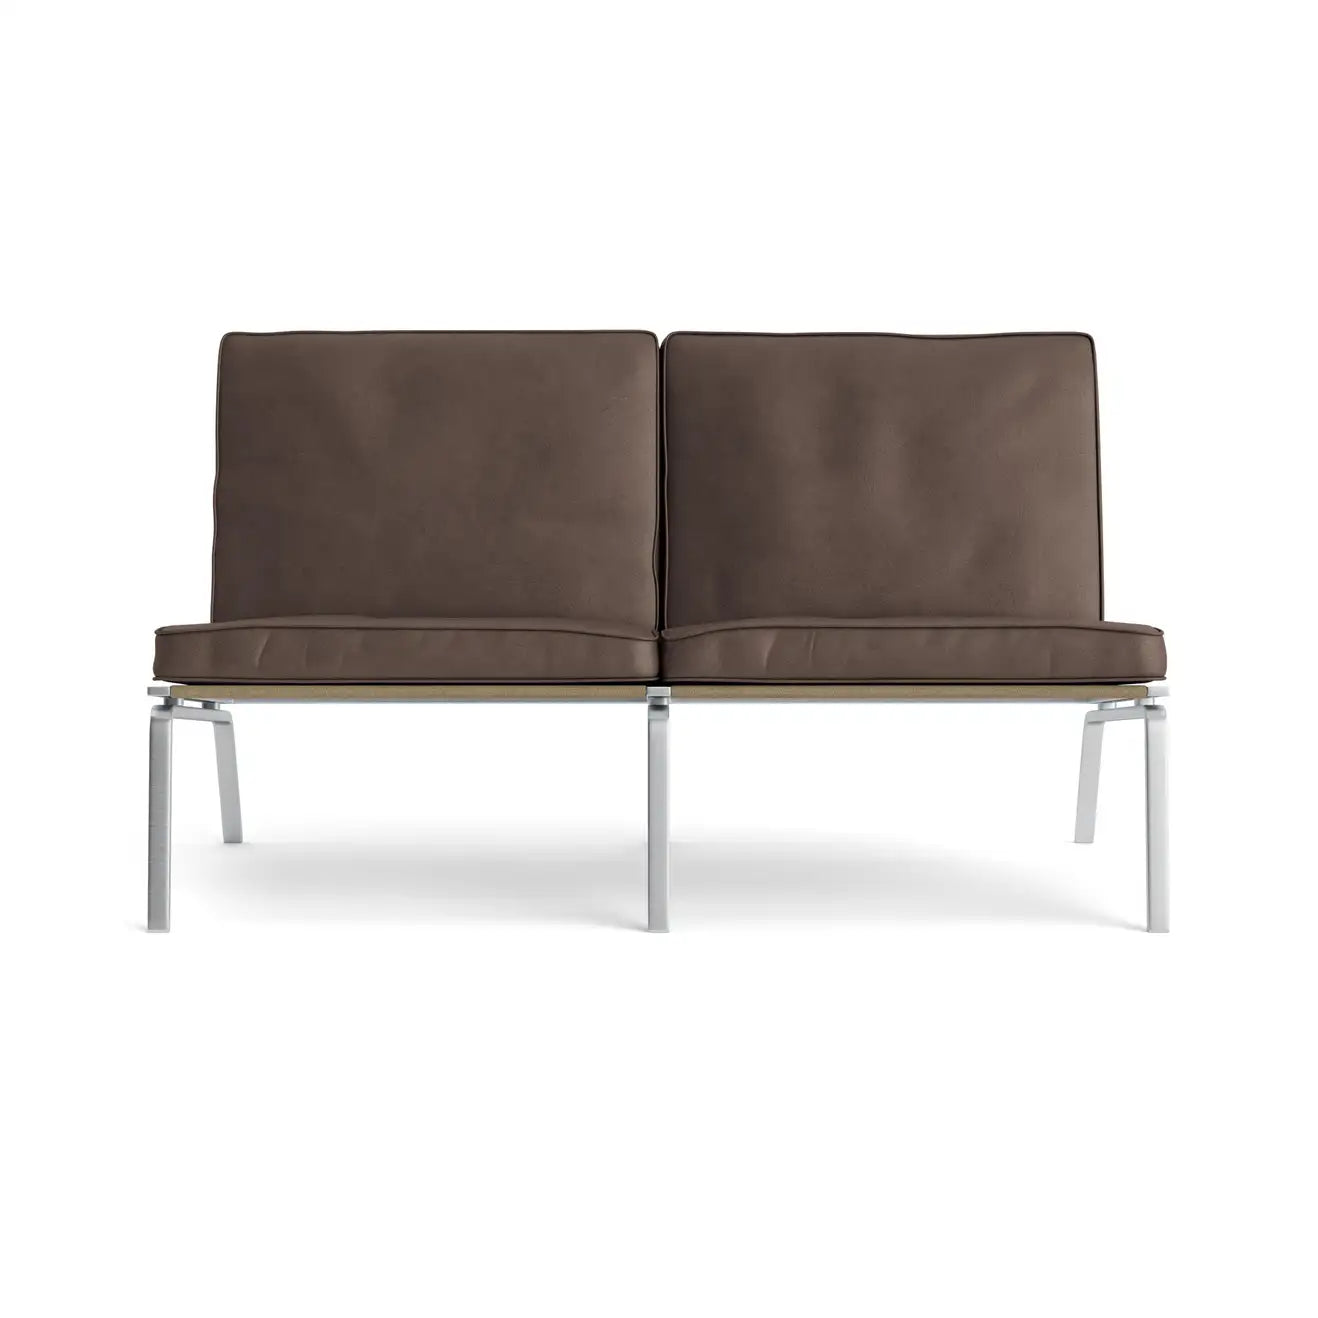 NORR11 MAN SOFA TWO SEATER - $13,000-$17,400